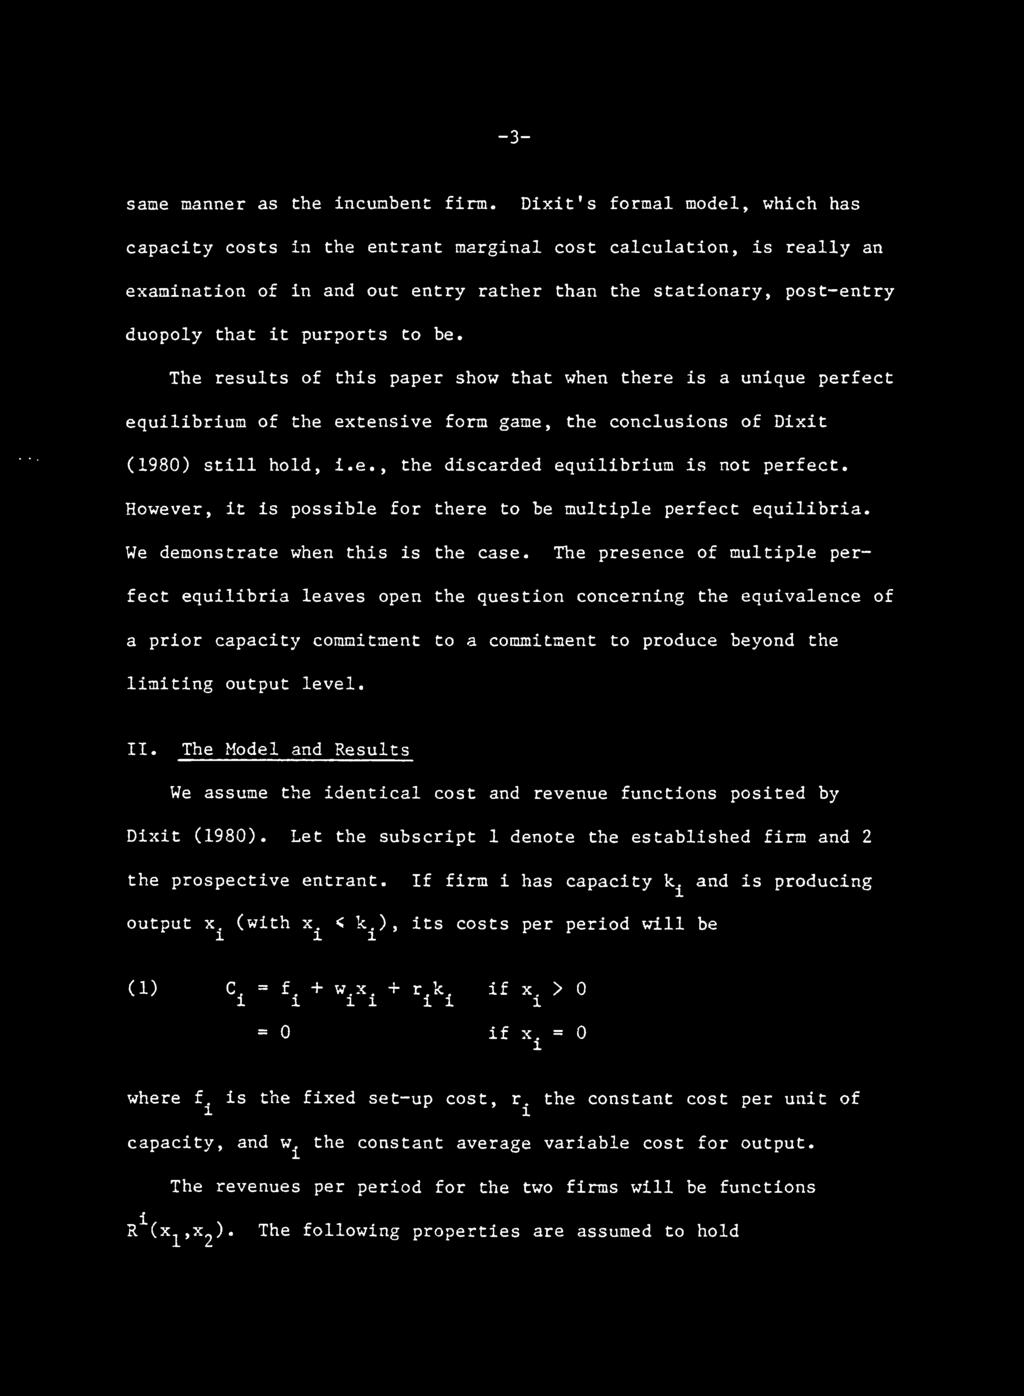 to be. The results of this paper show that when there is a unique perfect equilibrium of the extensive form game, the conclusions of Dixit (1980) still hold, i.e., the discarded equilibrium is not perfect.